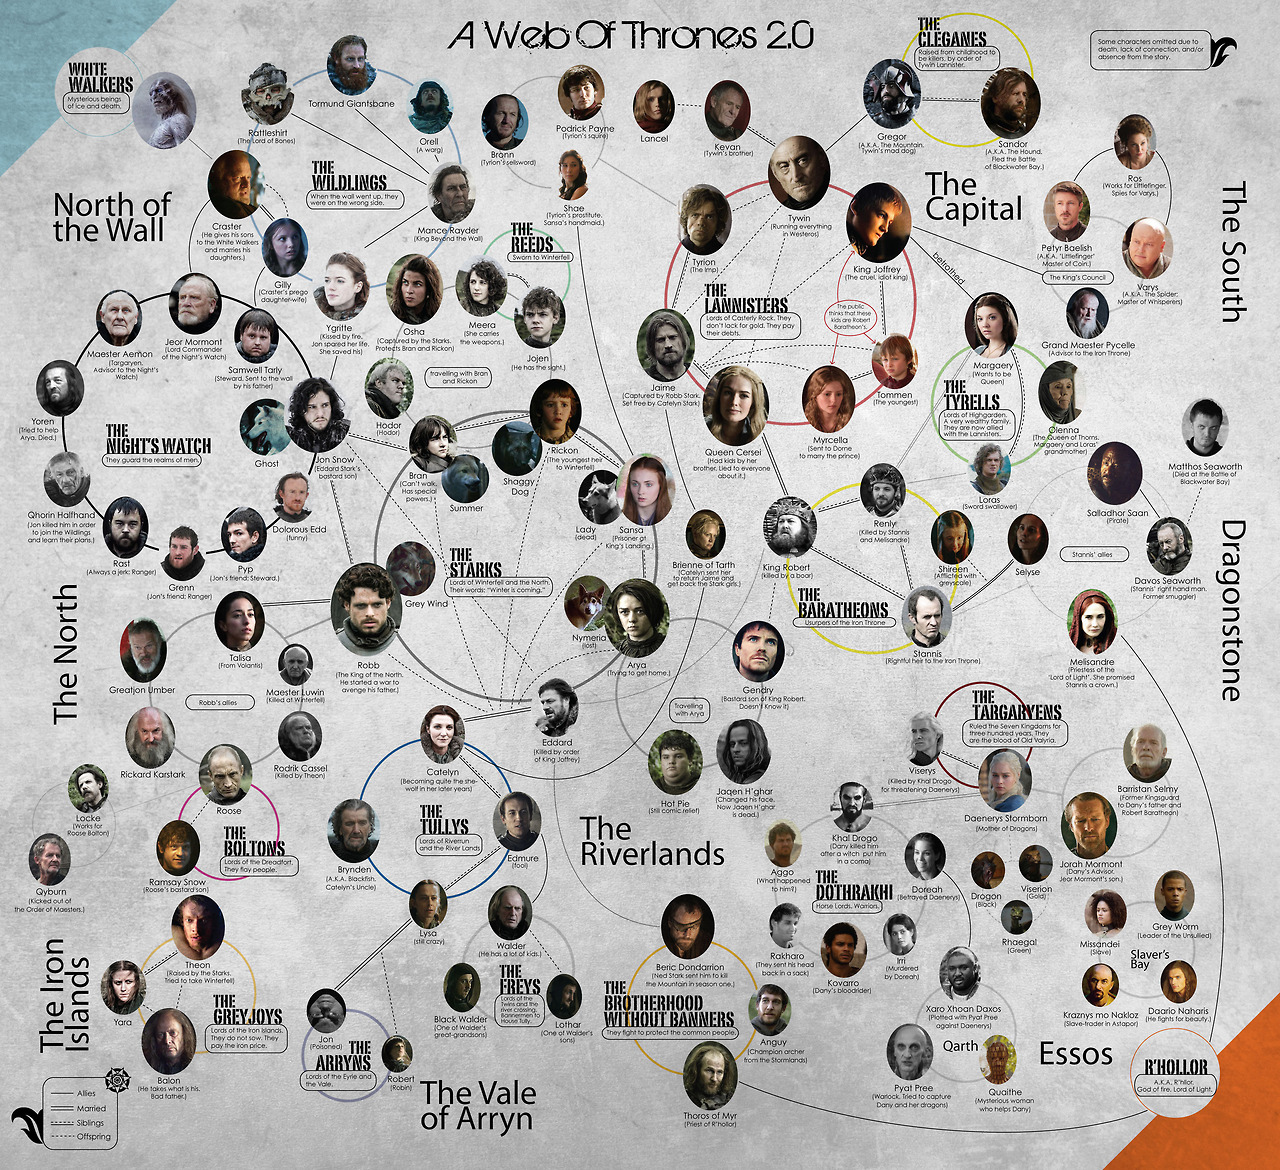 A-Web-of-Thrones-Sset-2-game-of-thrones-